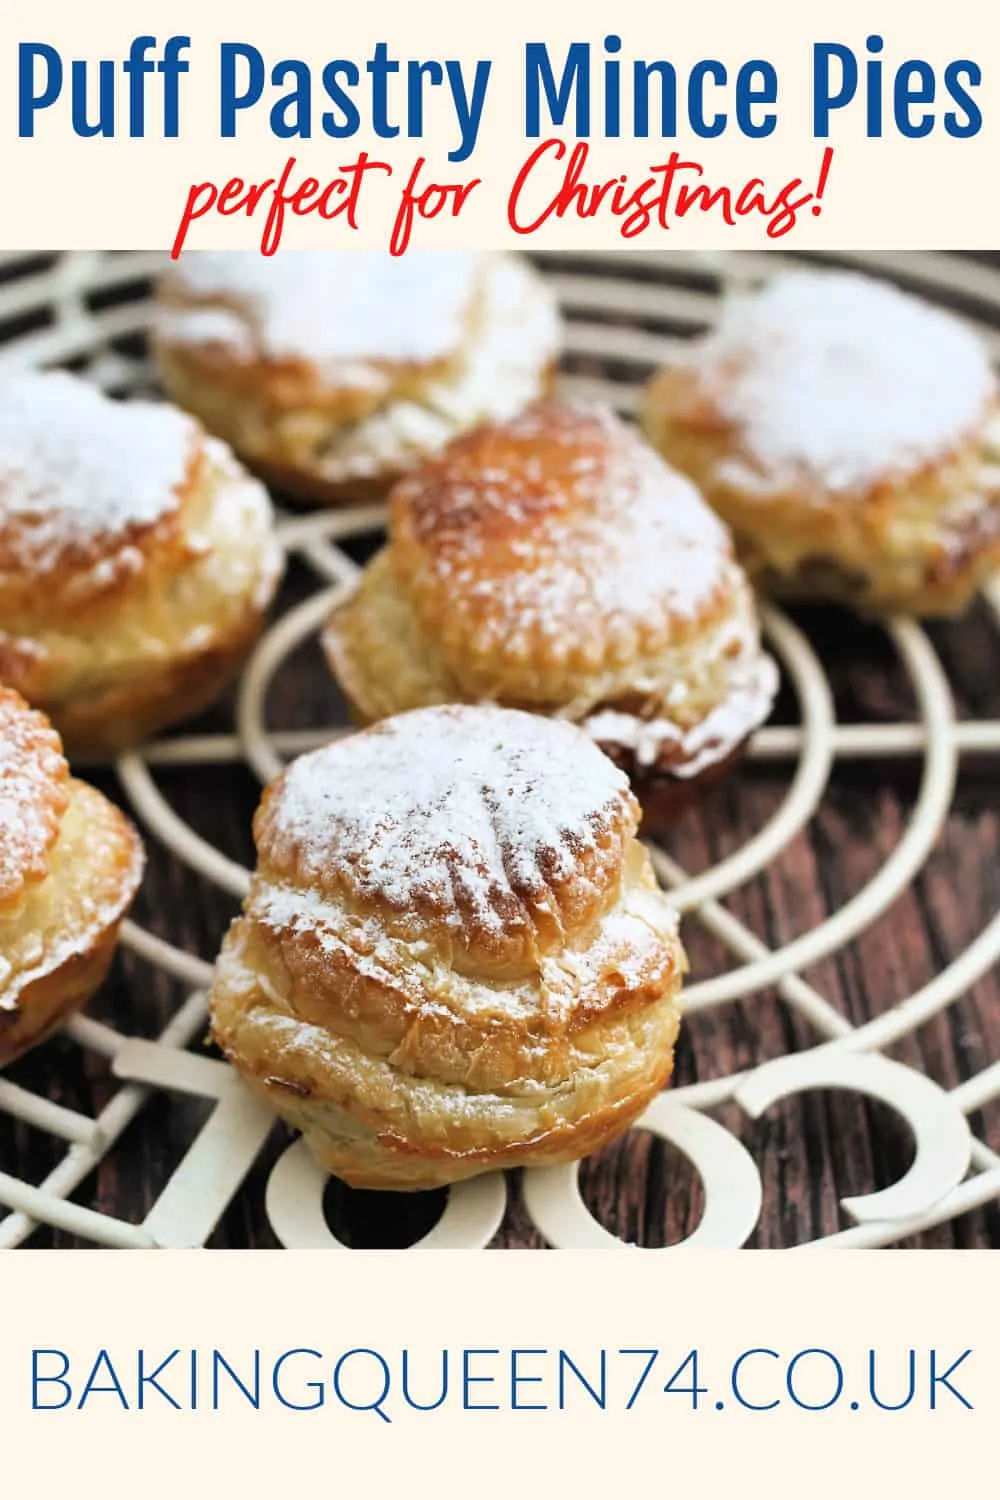 Puff pastry mince pies image and text collage for pinning.